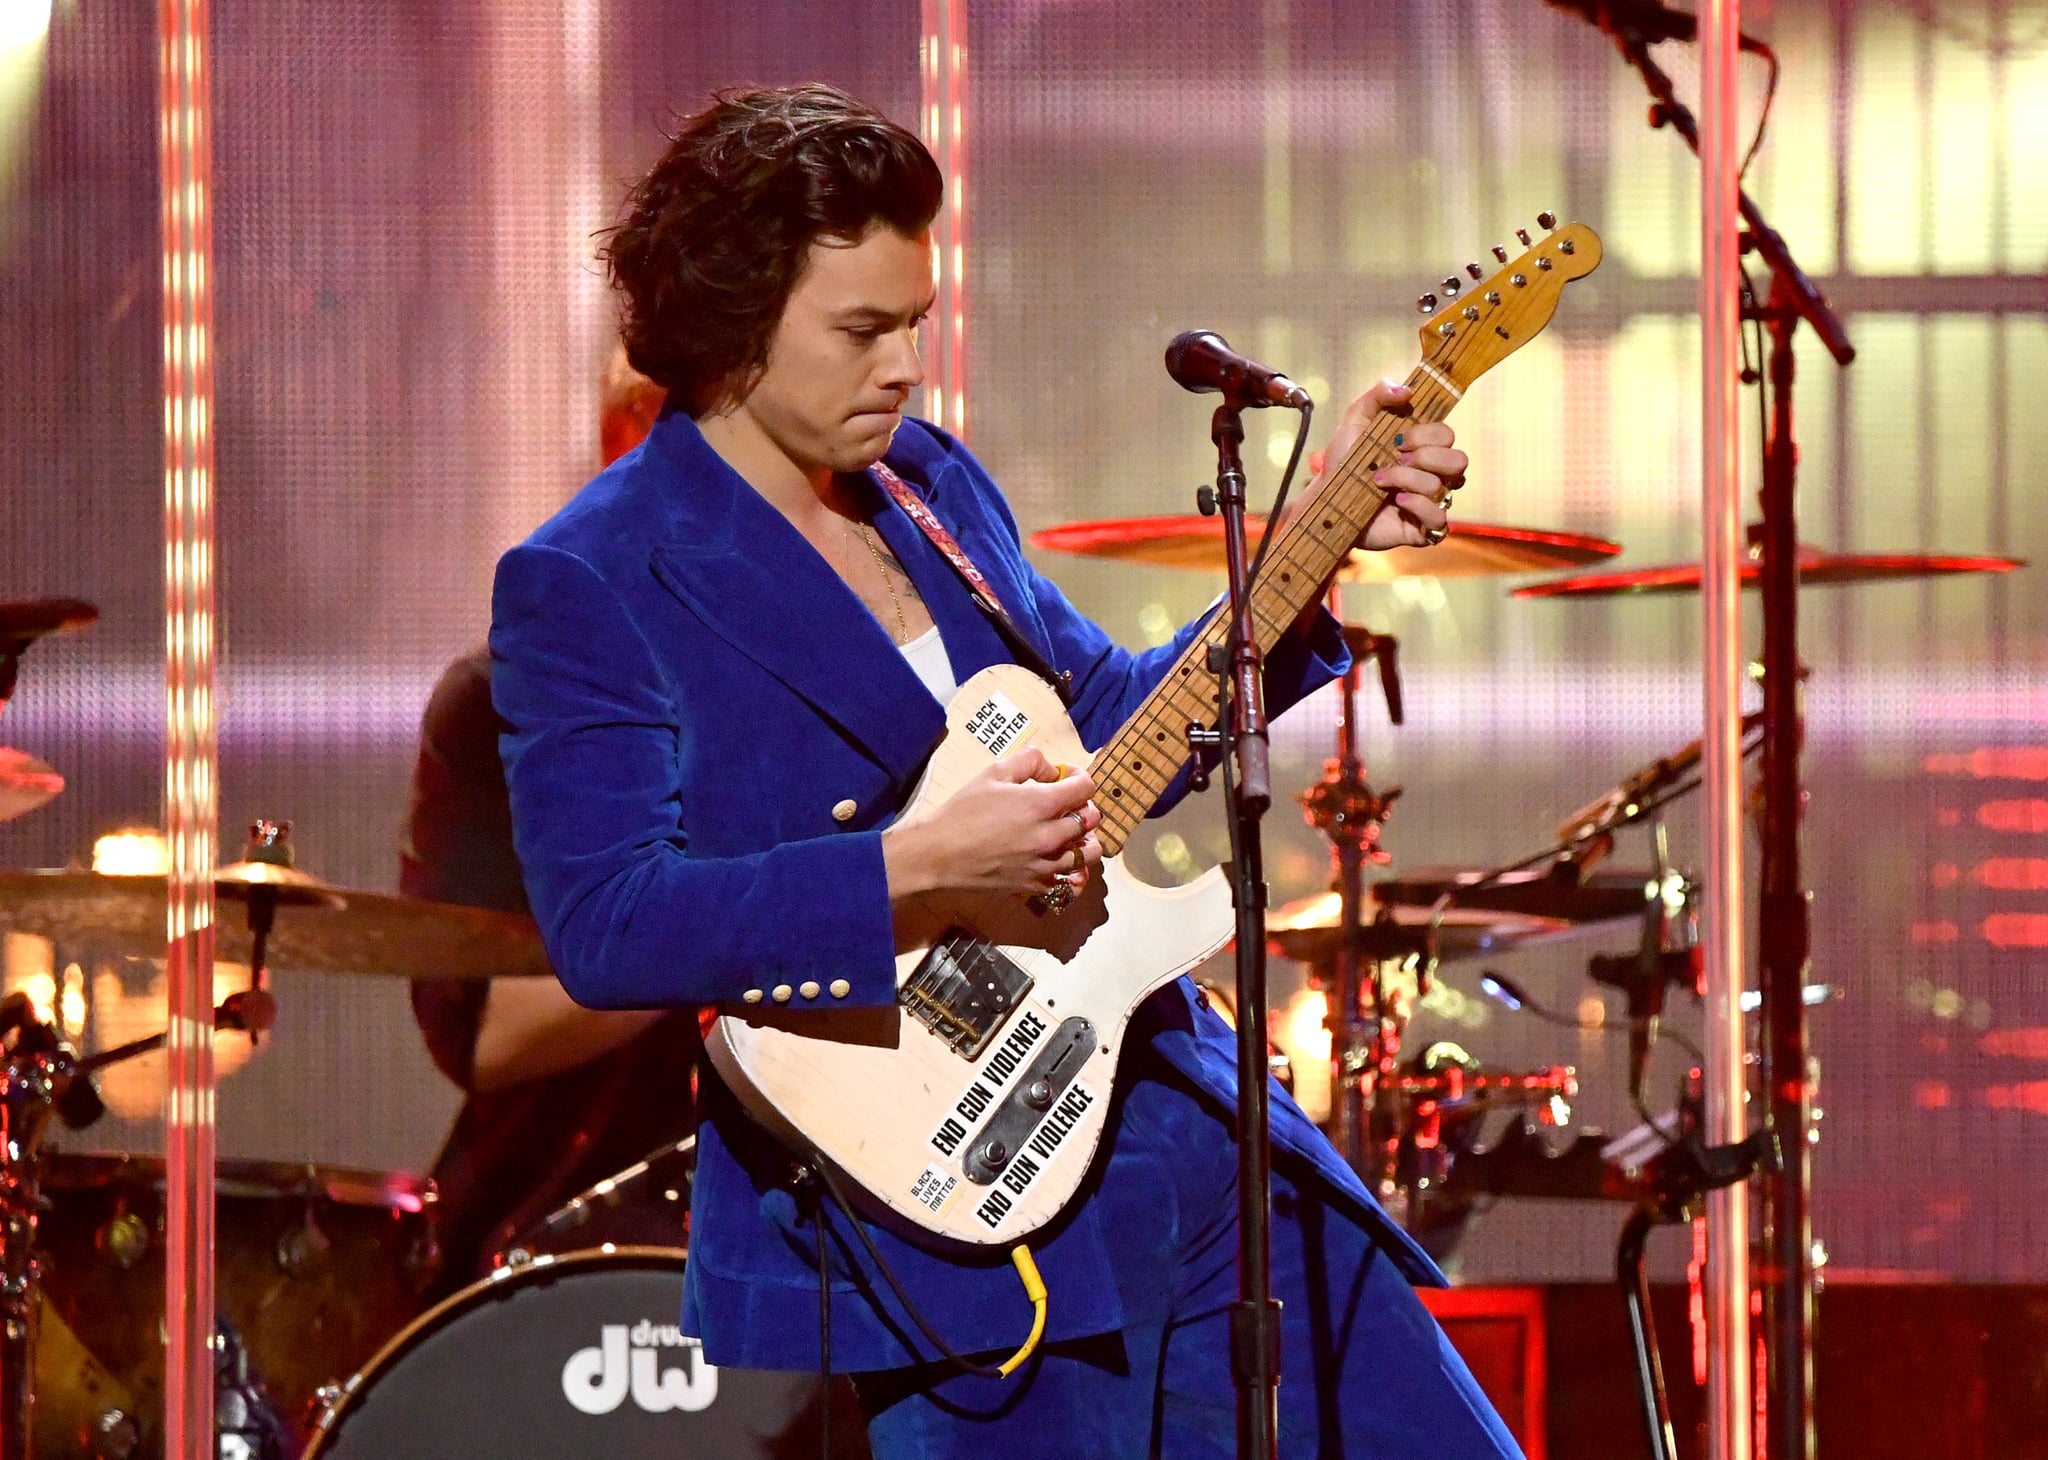 NEW YORK, NEW YORK - MARCH 29: Harry Styles performs at the  2019 Rock & Roll Hall Of Fame Induction Ceremony - Show at Barclays Center on March 29, 2019 in New York City. (Photo by Mike Coppola/WireImage)